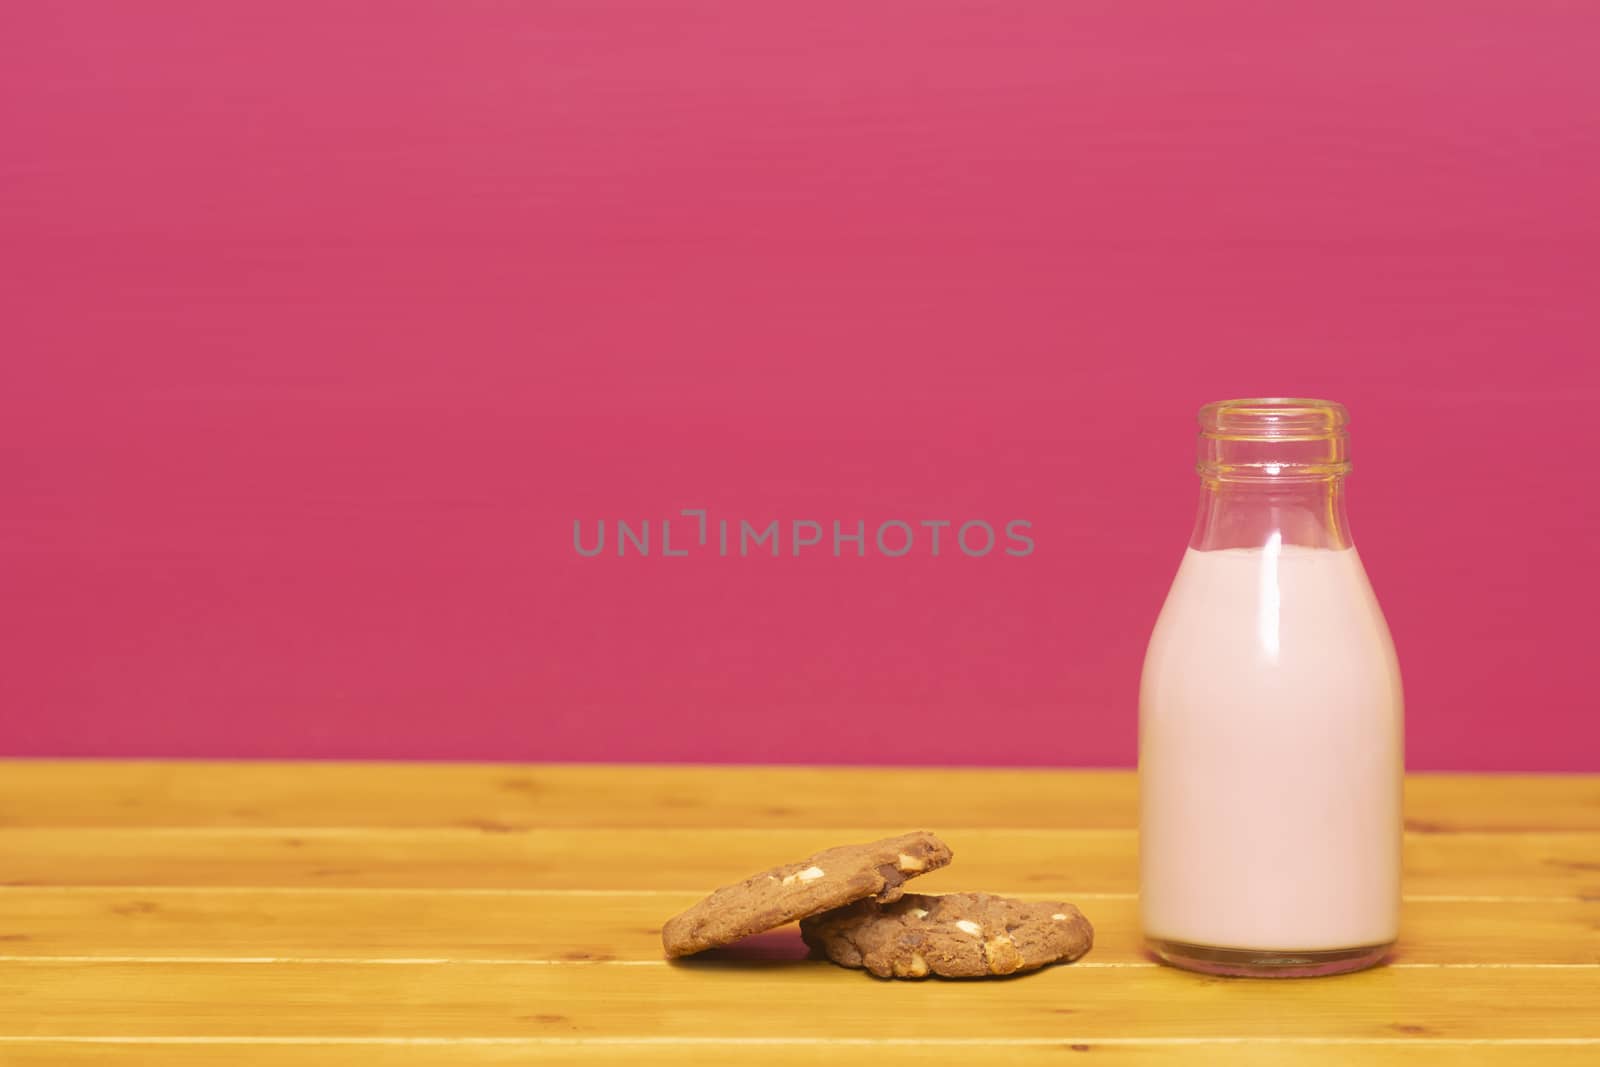 Strawberry milkshake in a one-third pint glass milk bottle and a chocolate chip cookie, on a wooden table against a pink painted background